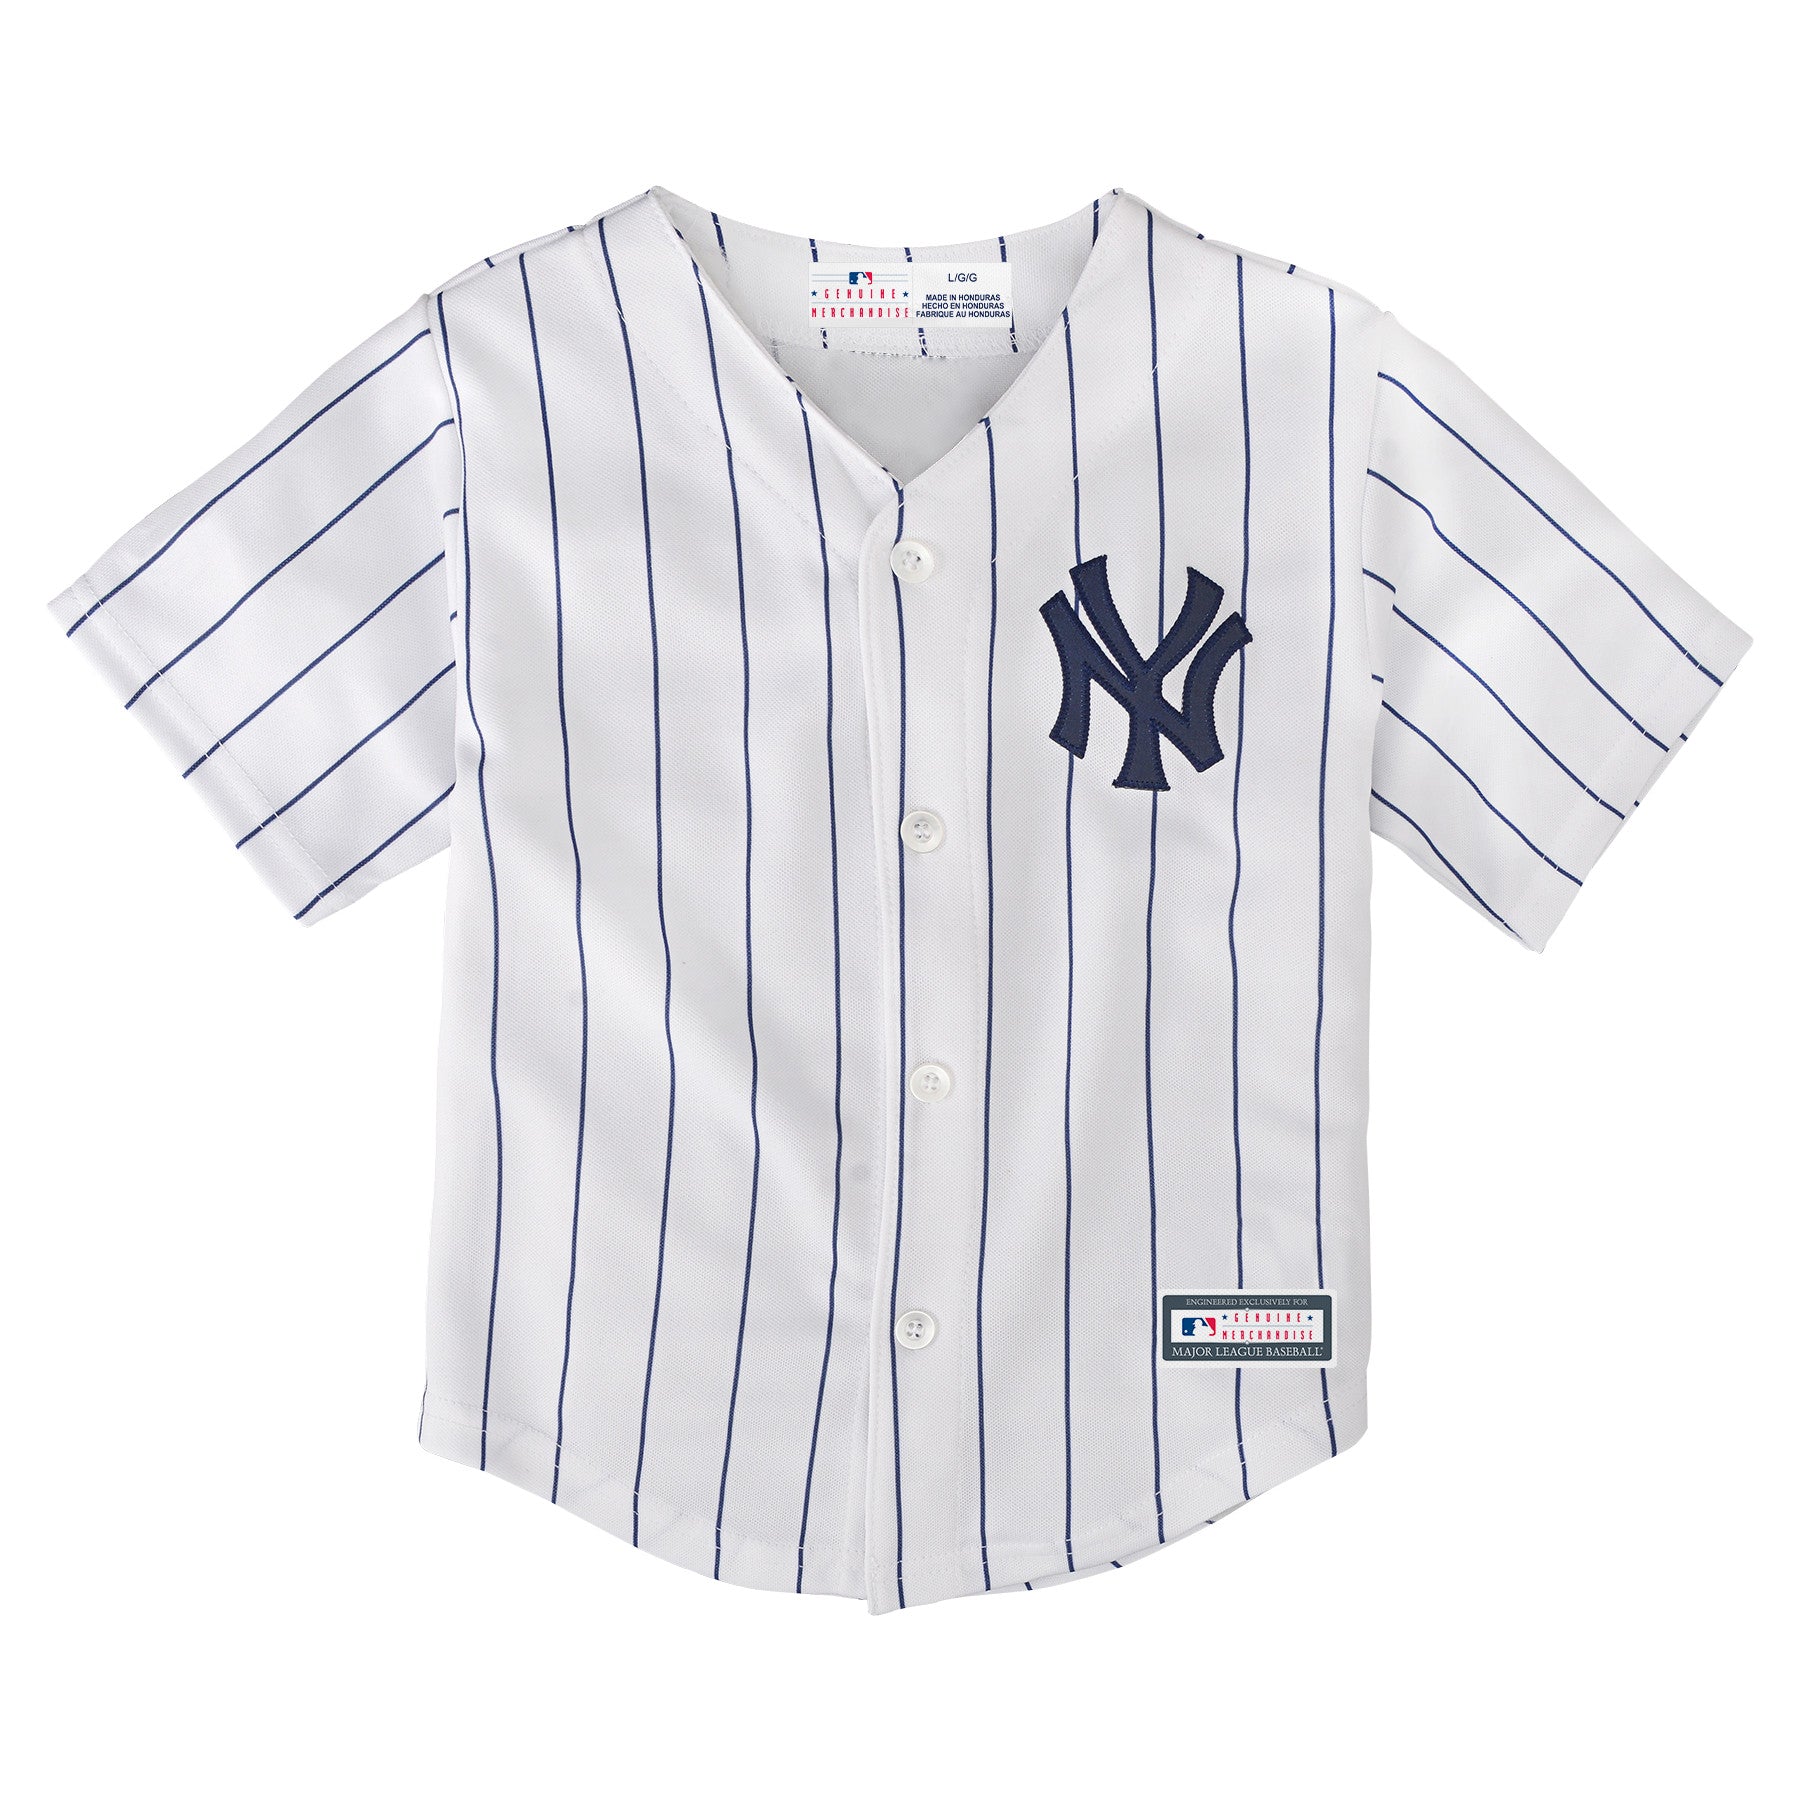 4t yankees jersey